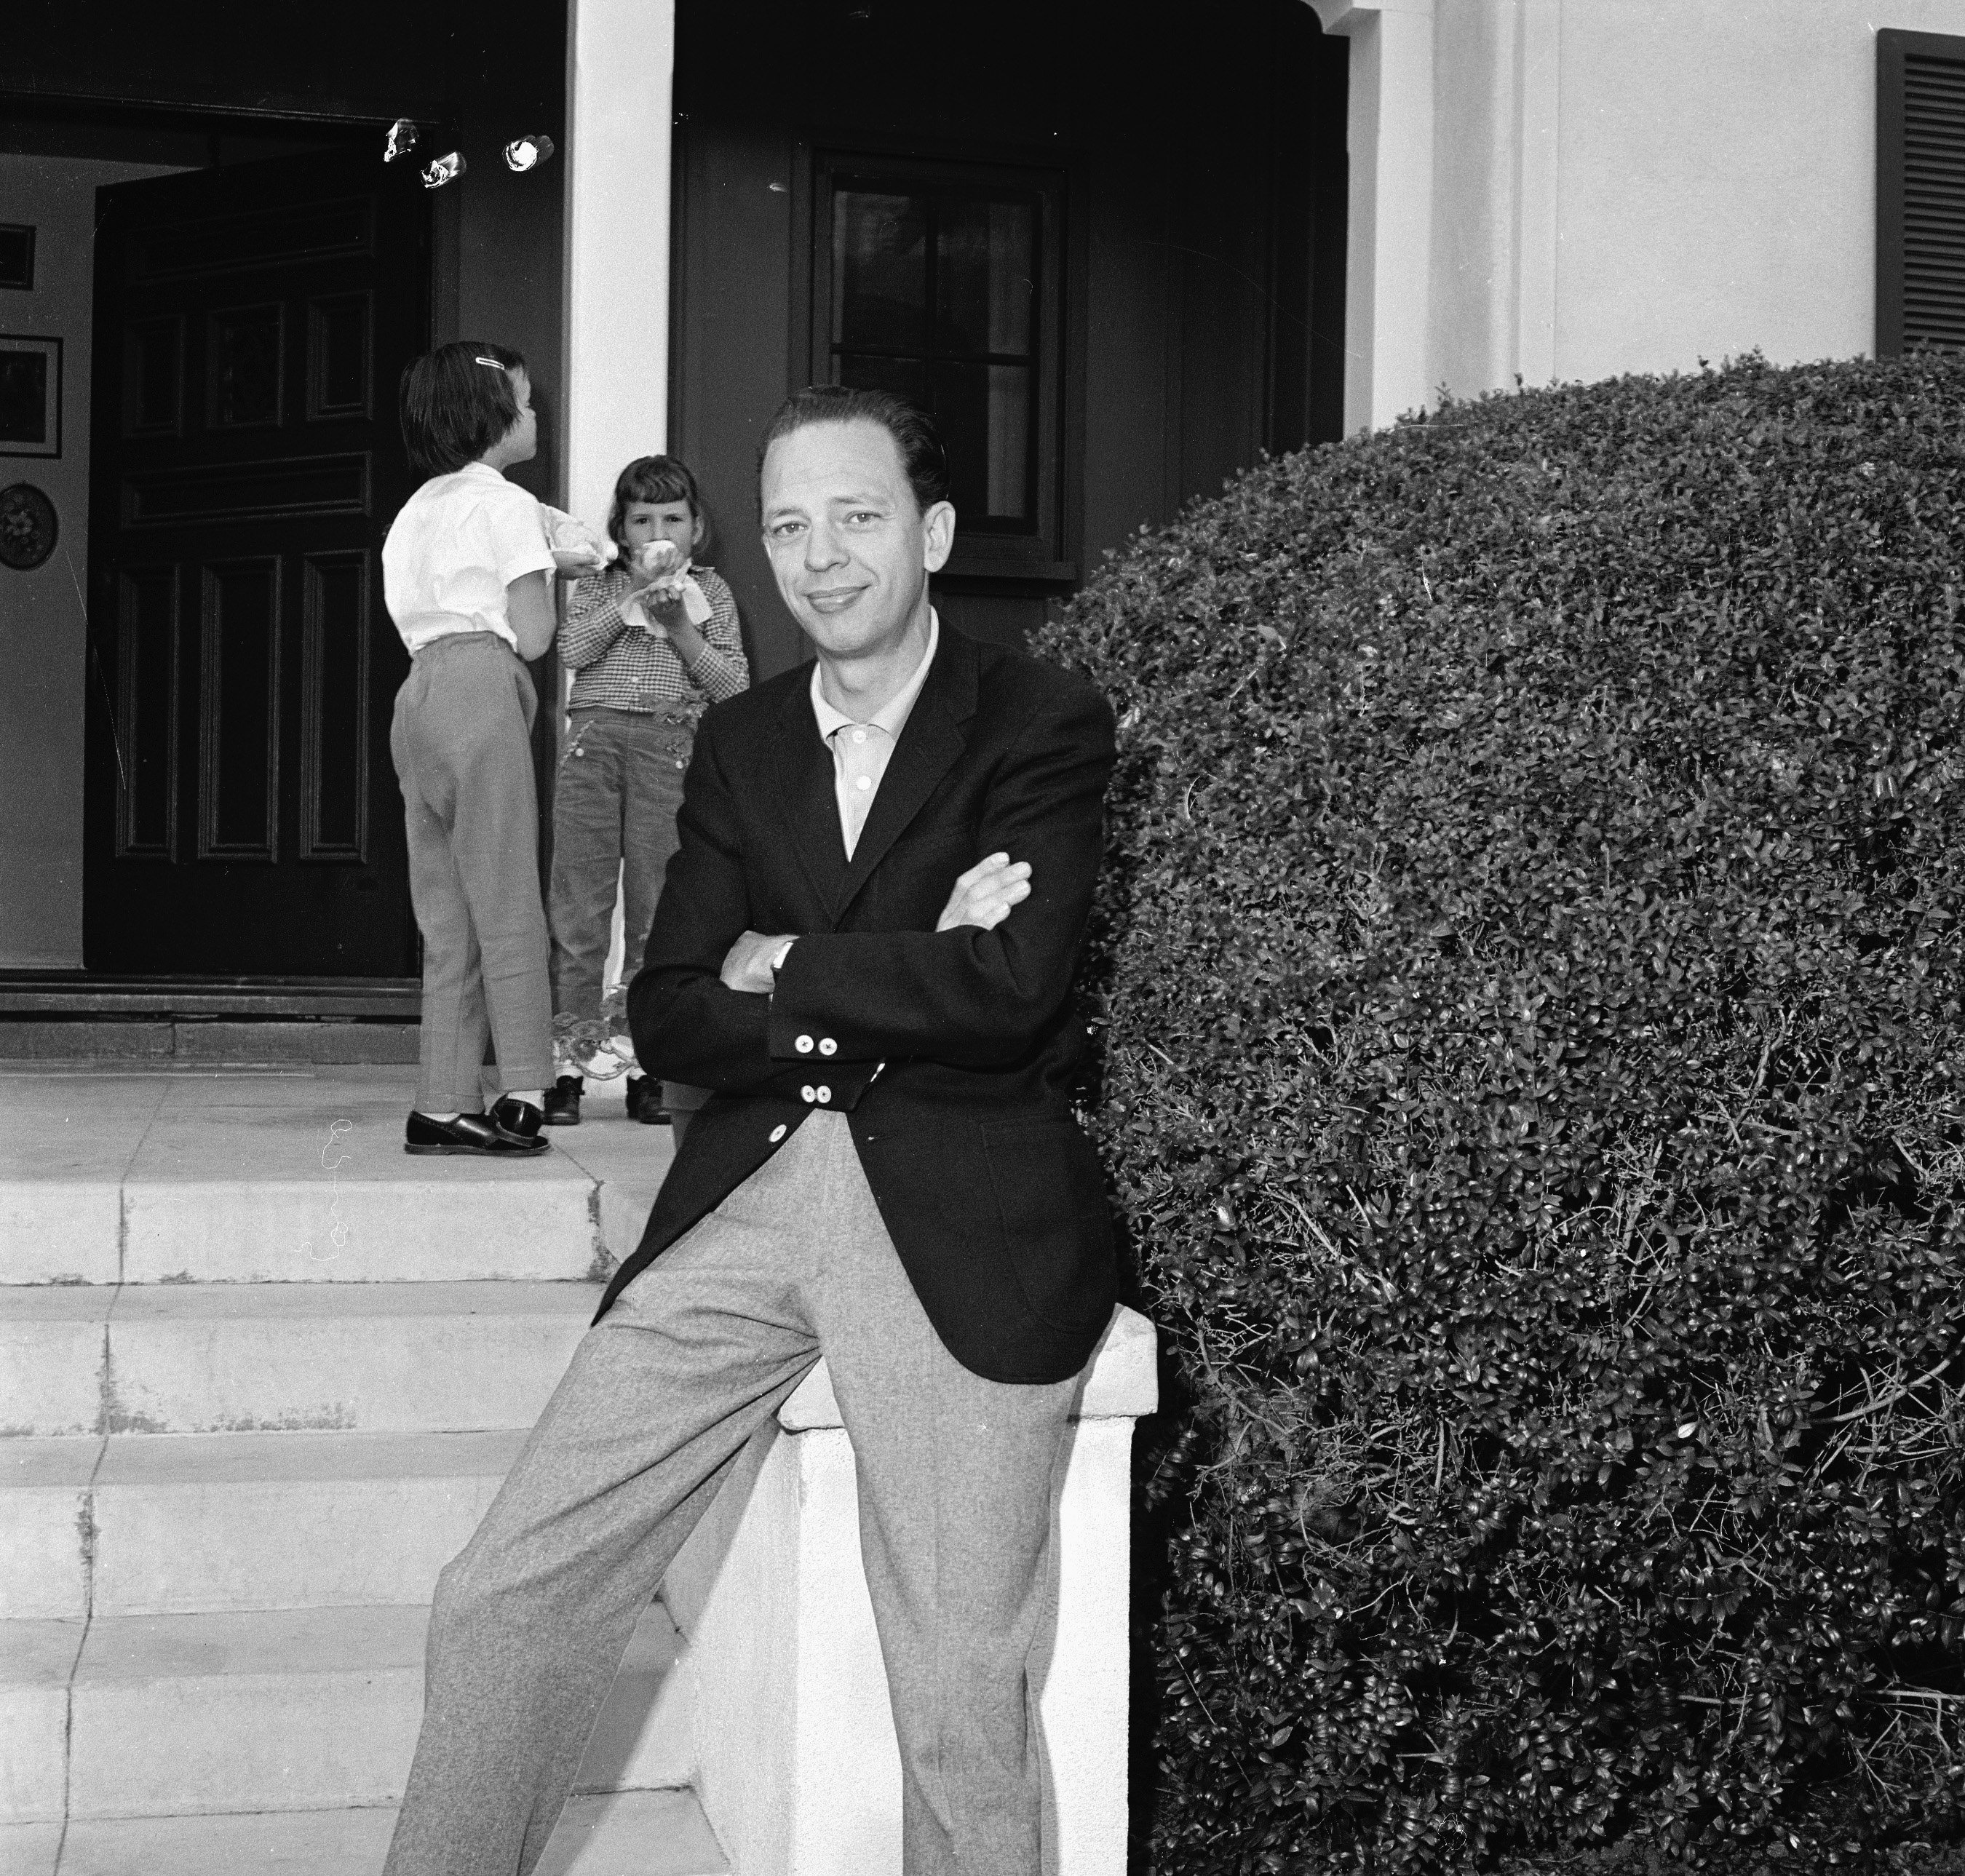 Portrait of American television actor Don Knotts as he poses, arms crossed, at the bottom of the steps to his house and his daughter Karen (in white) eats with a friend in the background.  March 2, 1961.| Source: Getty Images